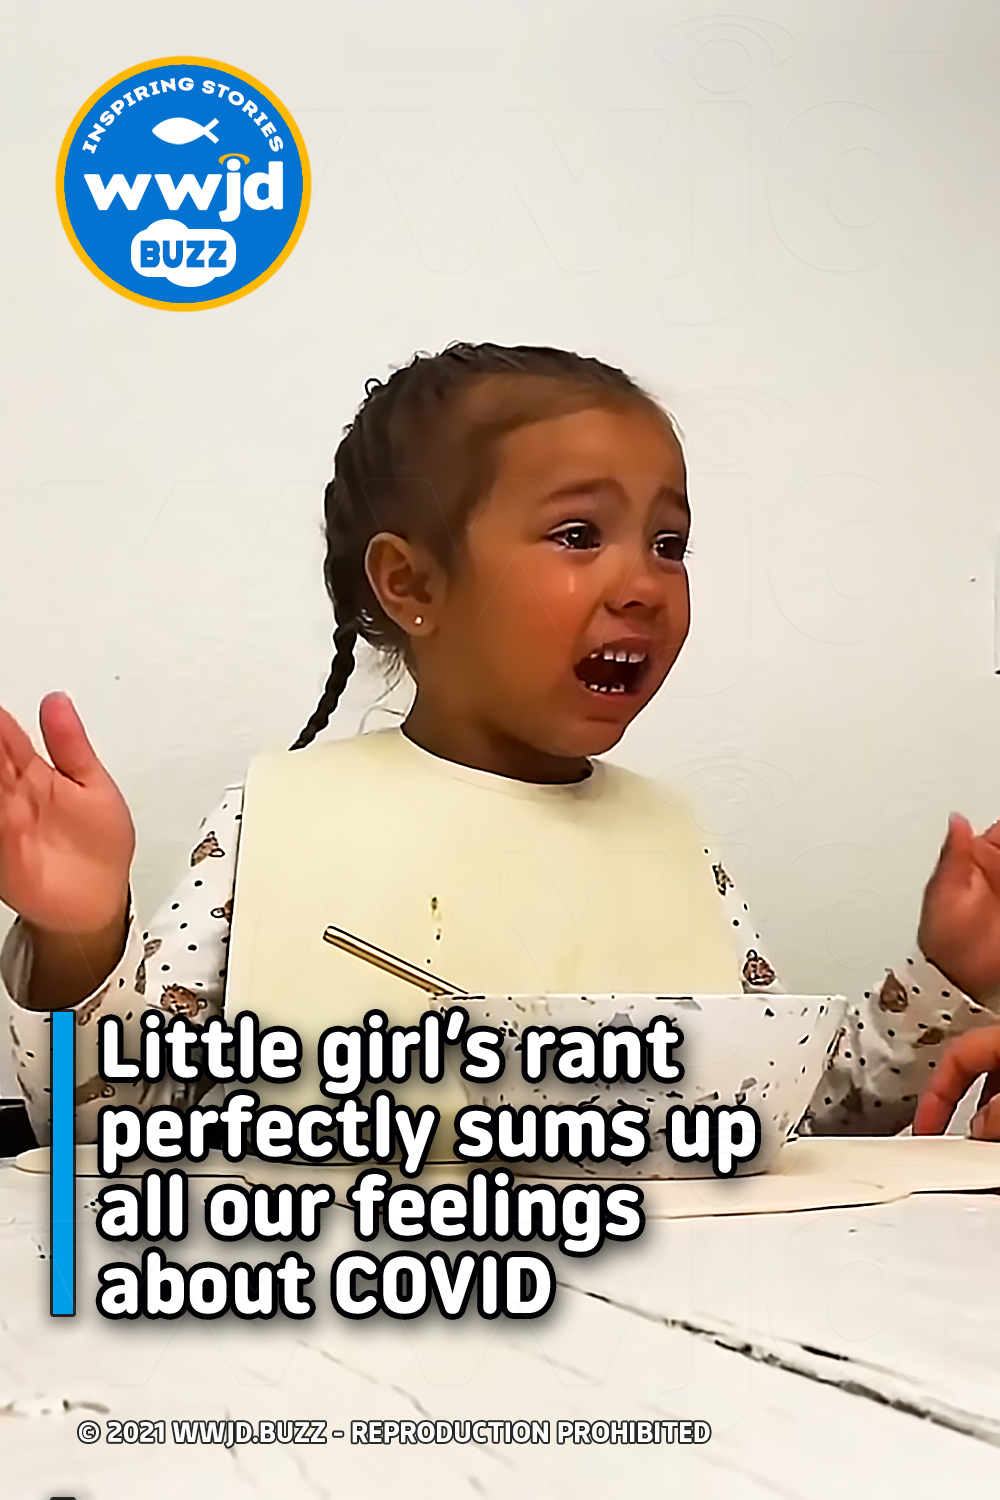 Little girl’s rant perfectly sums up all our feelings about COVID